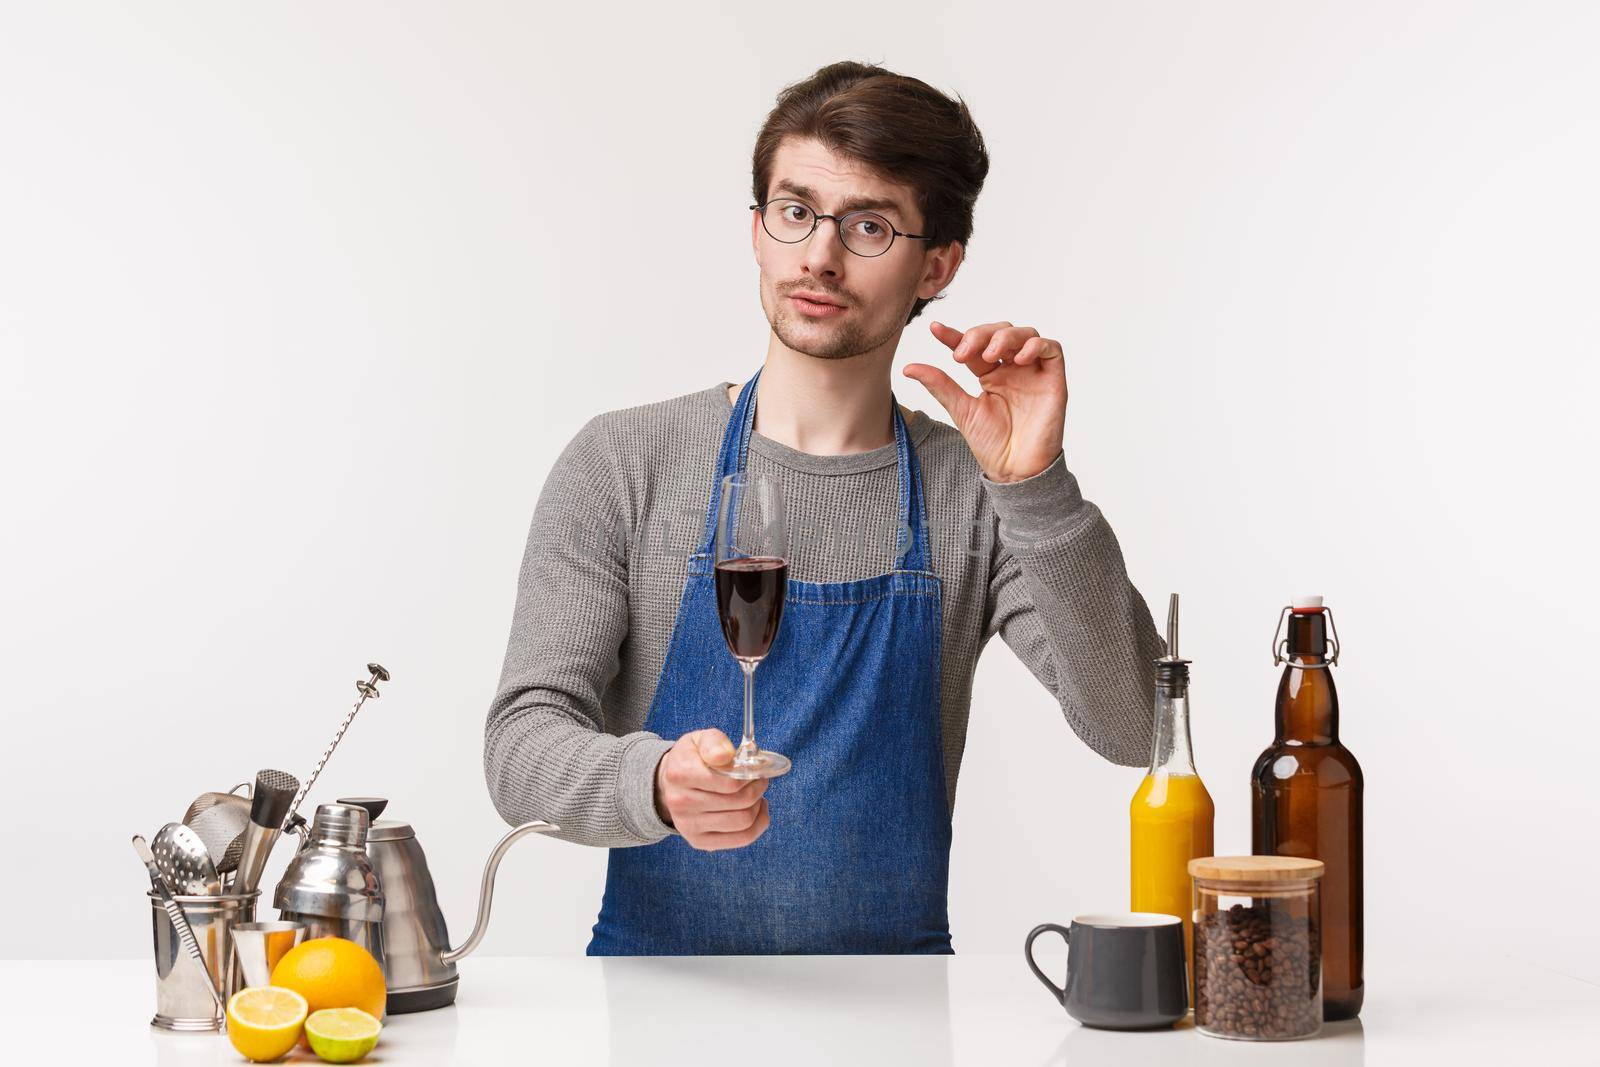 Barista, cafe worker and bartender concept. Professional good-looking male employee pouring glass of wine recommend drink little for good health, standing near bar counter, white background.